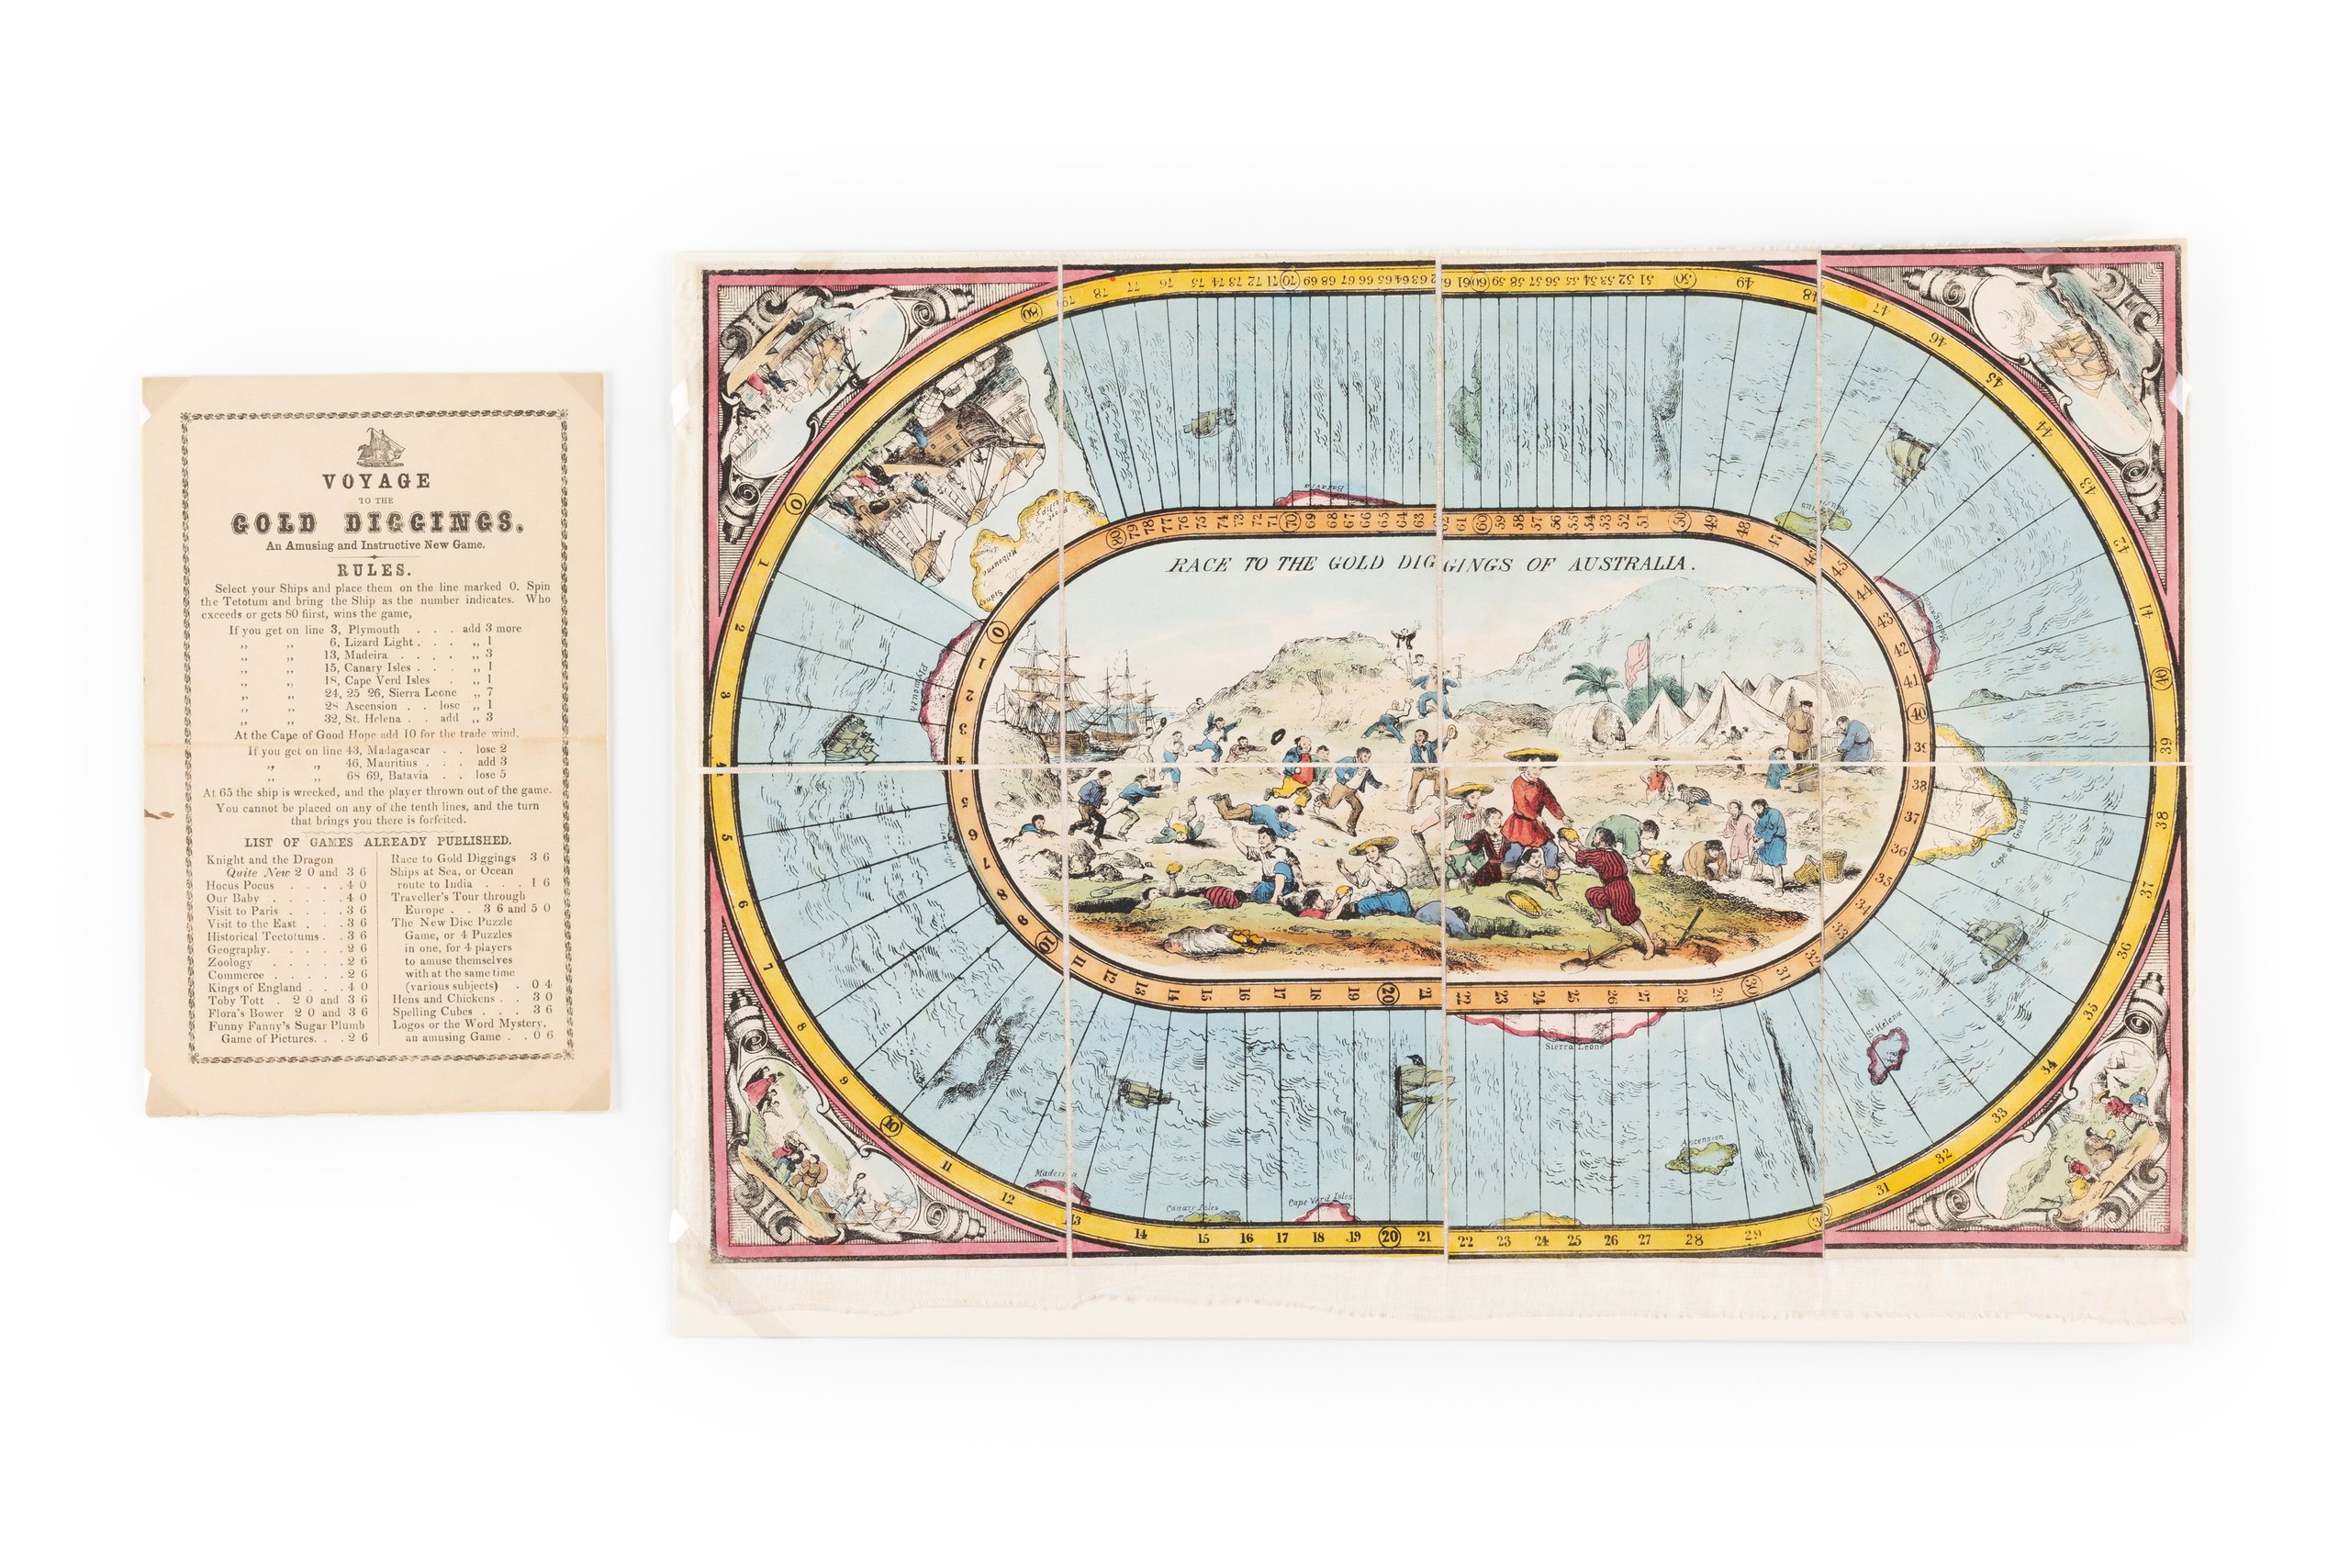 'Race to the gold diggings of Australia' board game